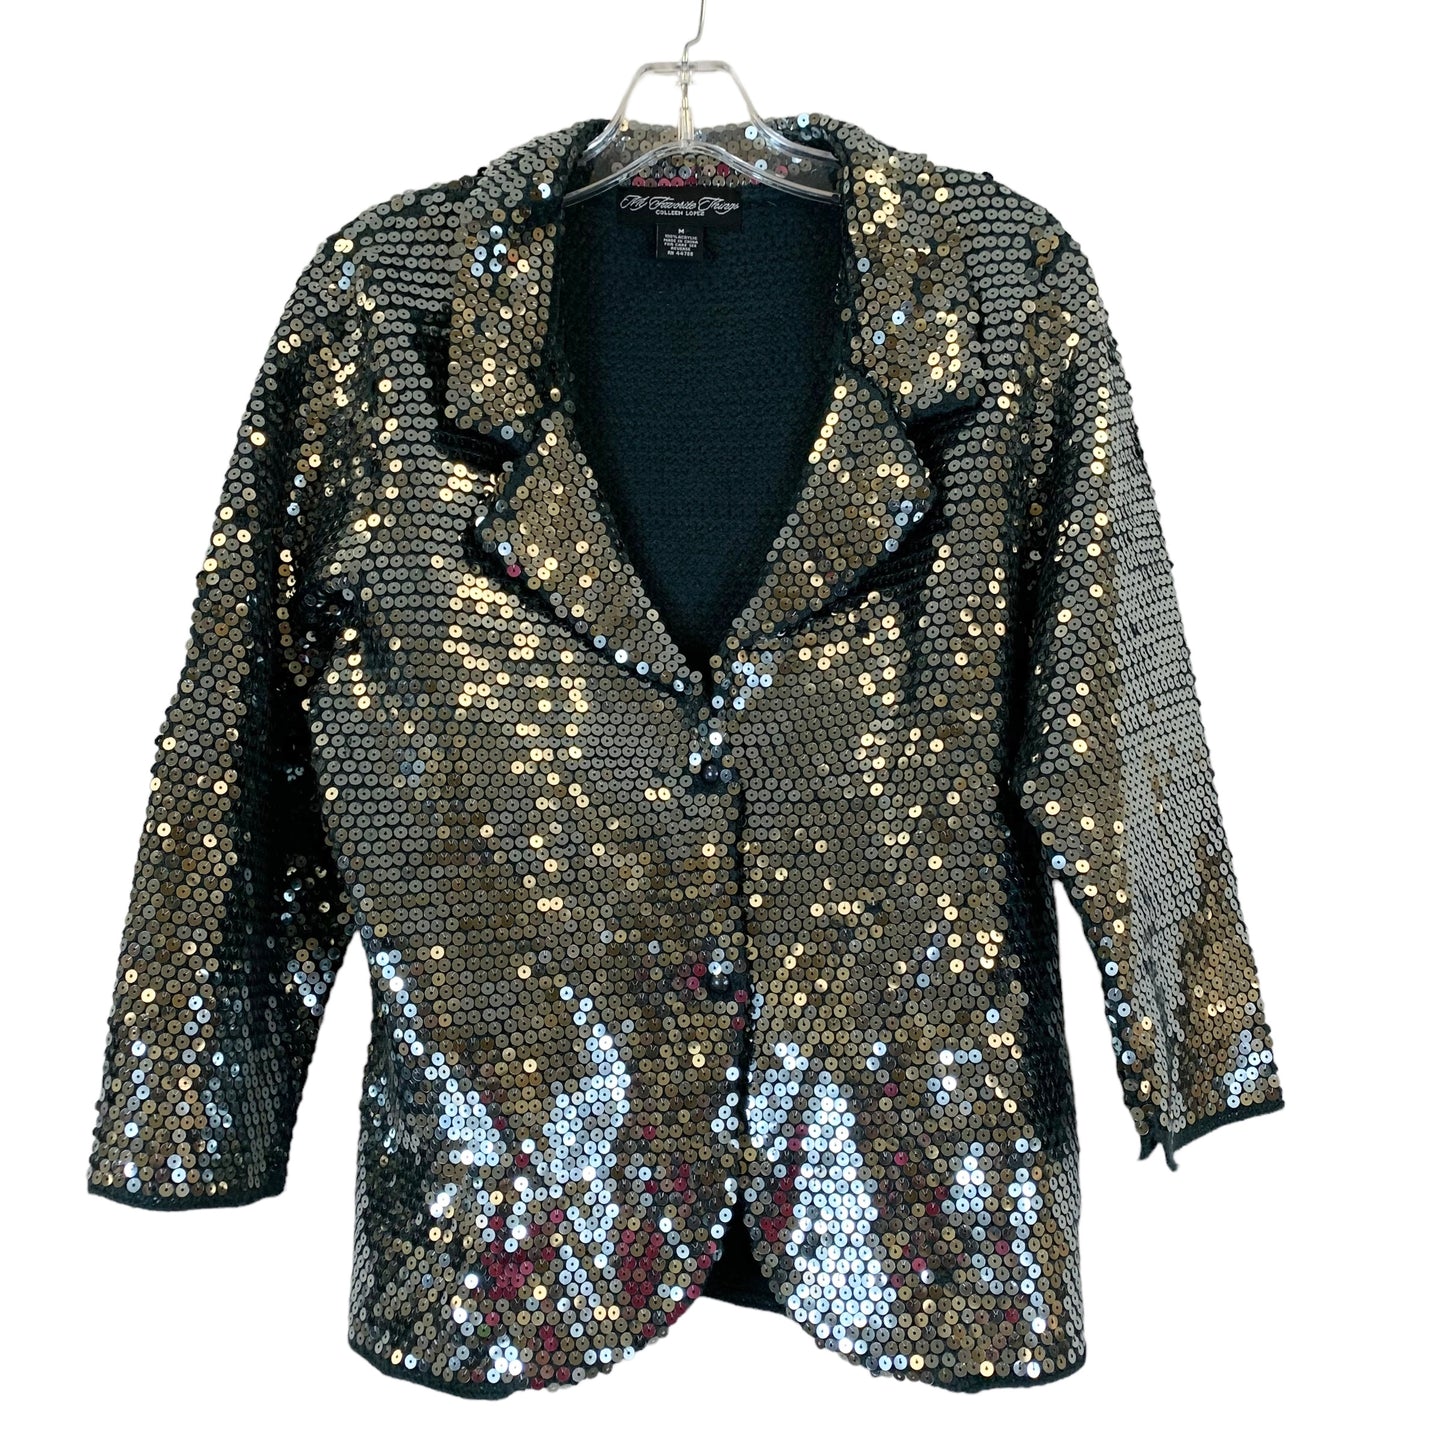 Blazer By My Favorite Things  Size: M